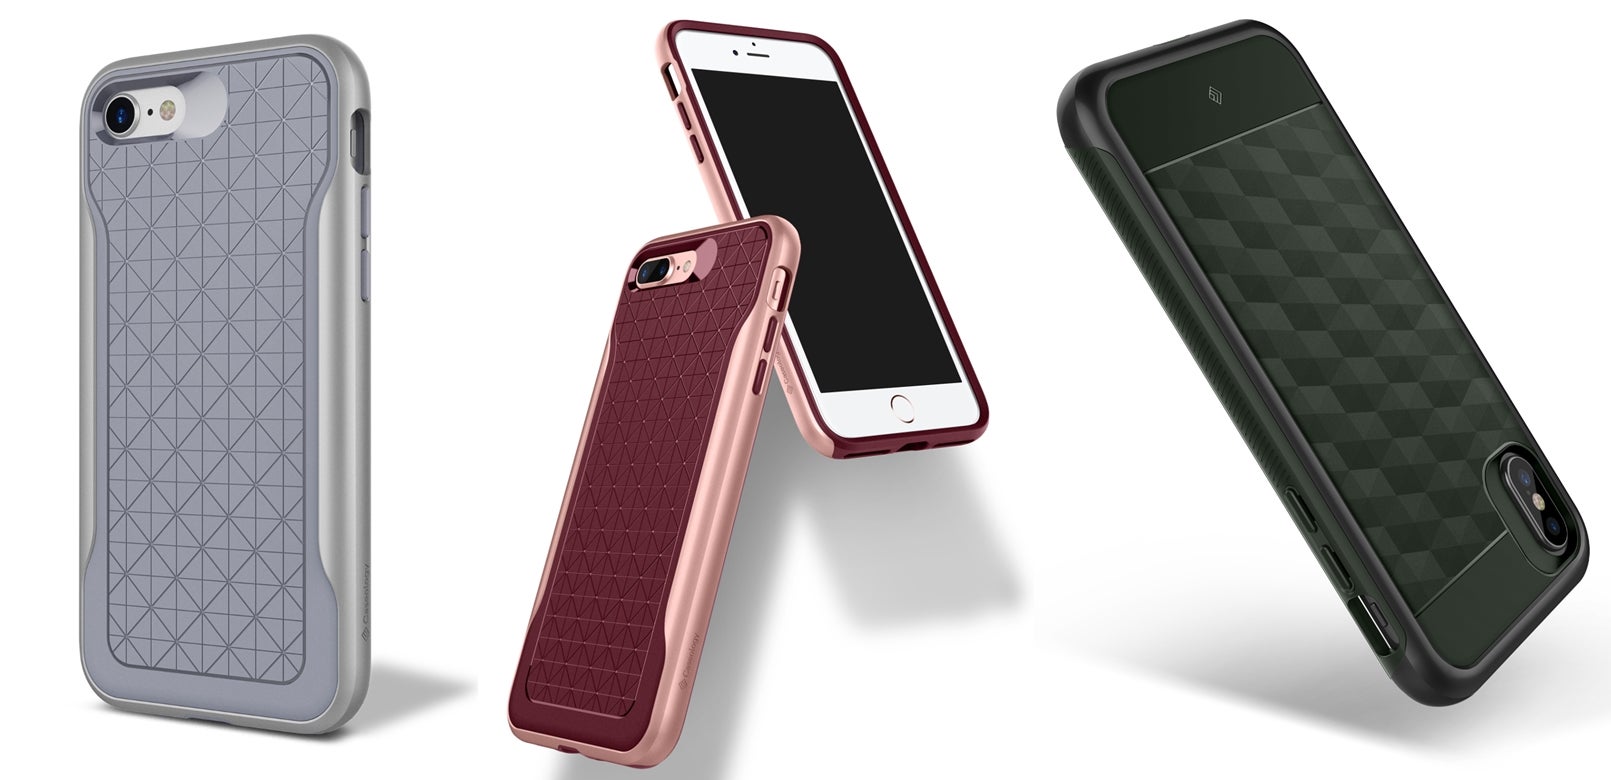 Caseology's iPhone 8, 8 Plus, and iPhone X cases are here: protection is priority